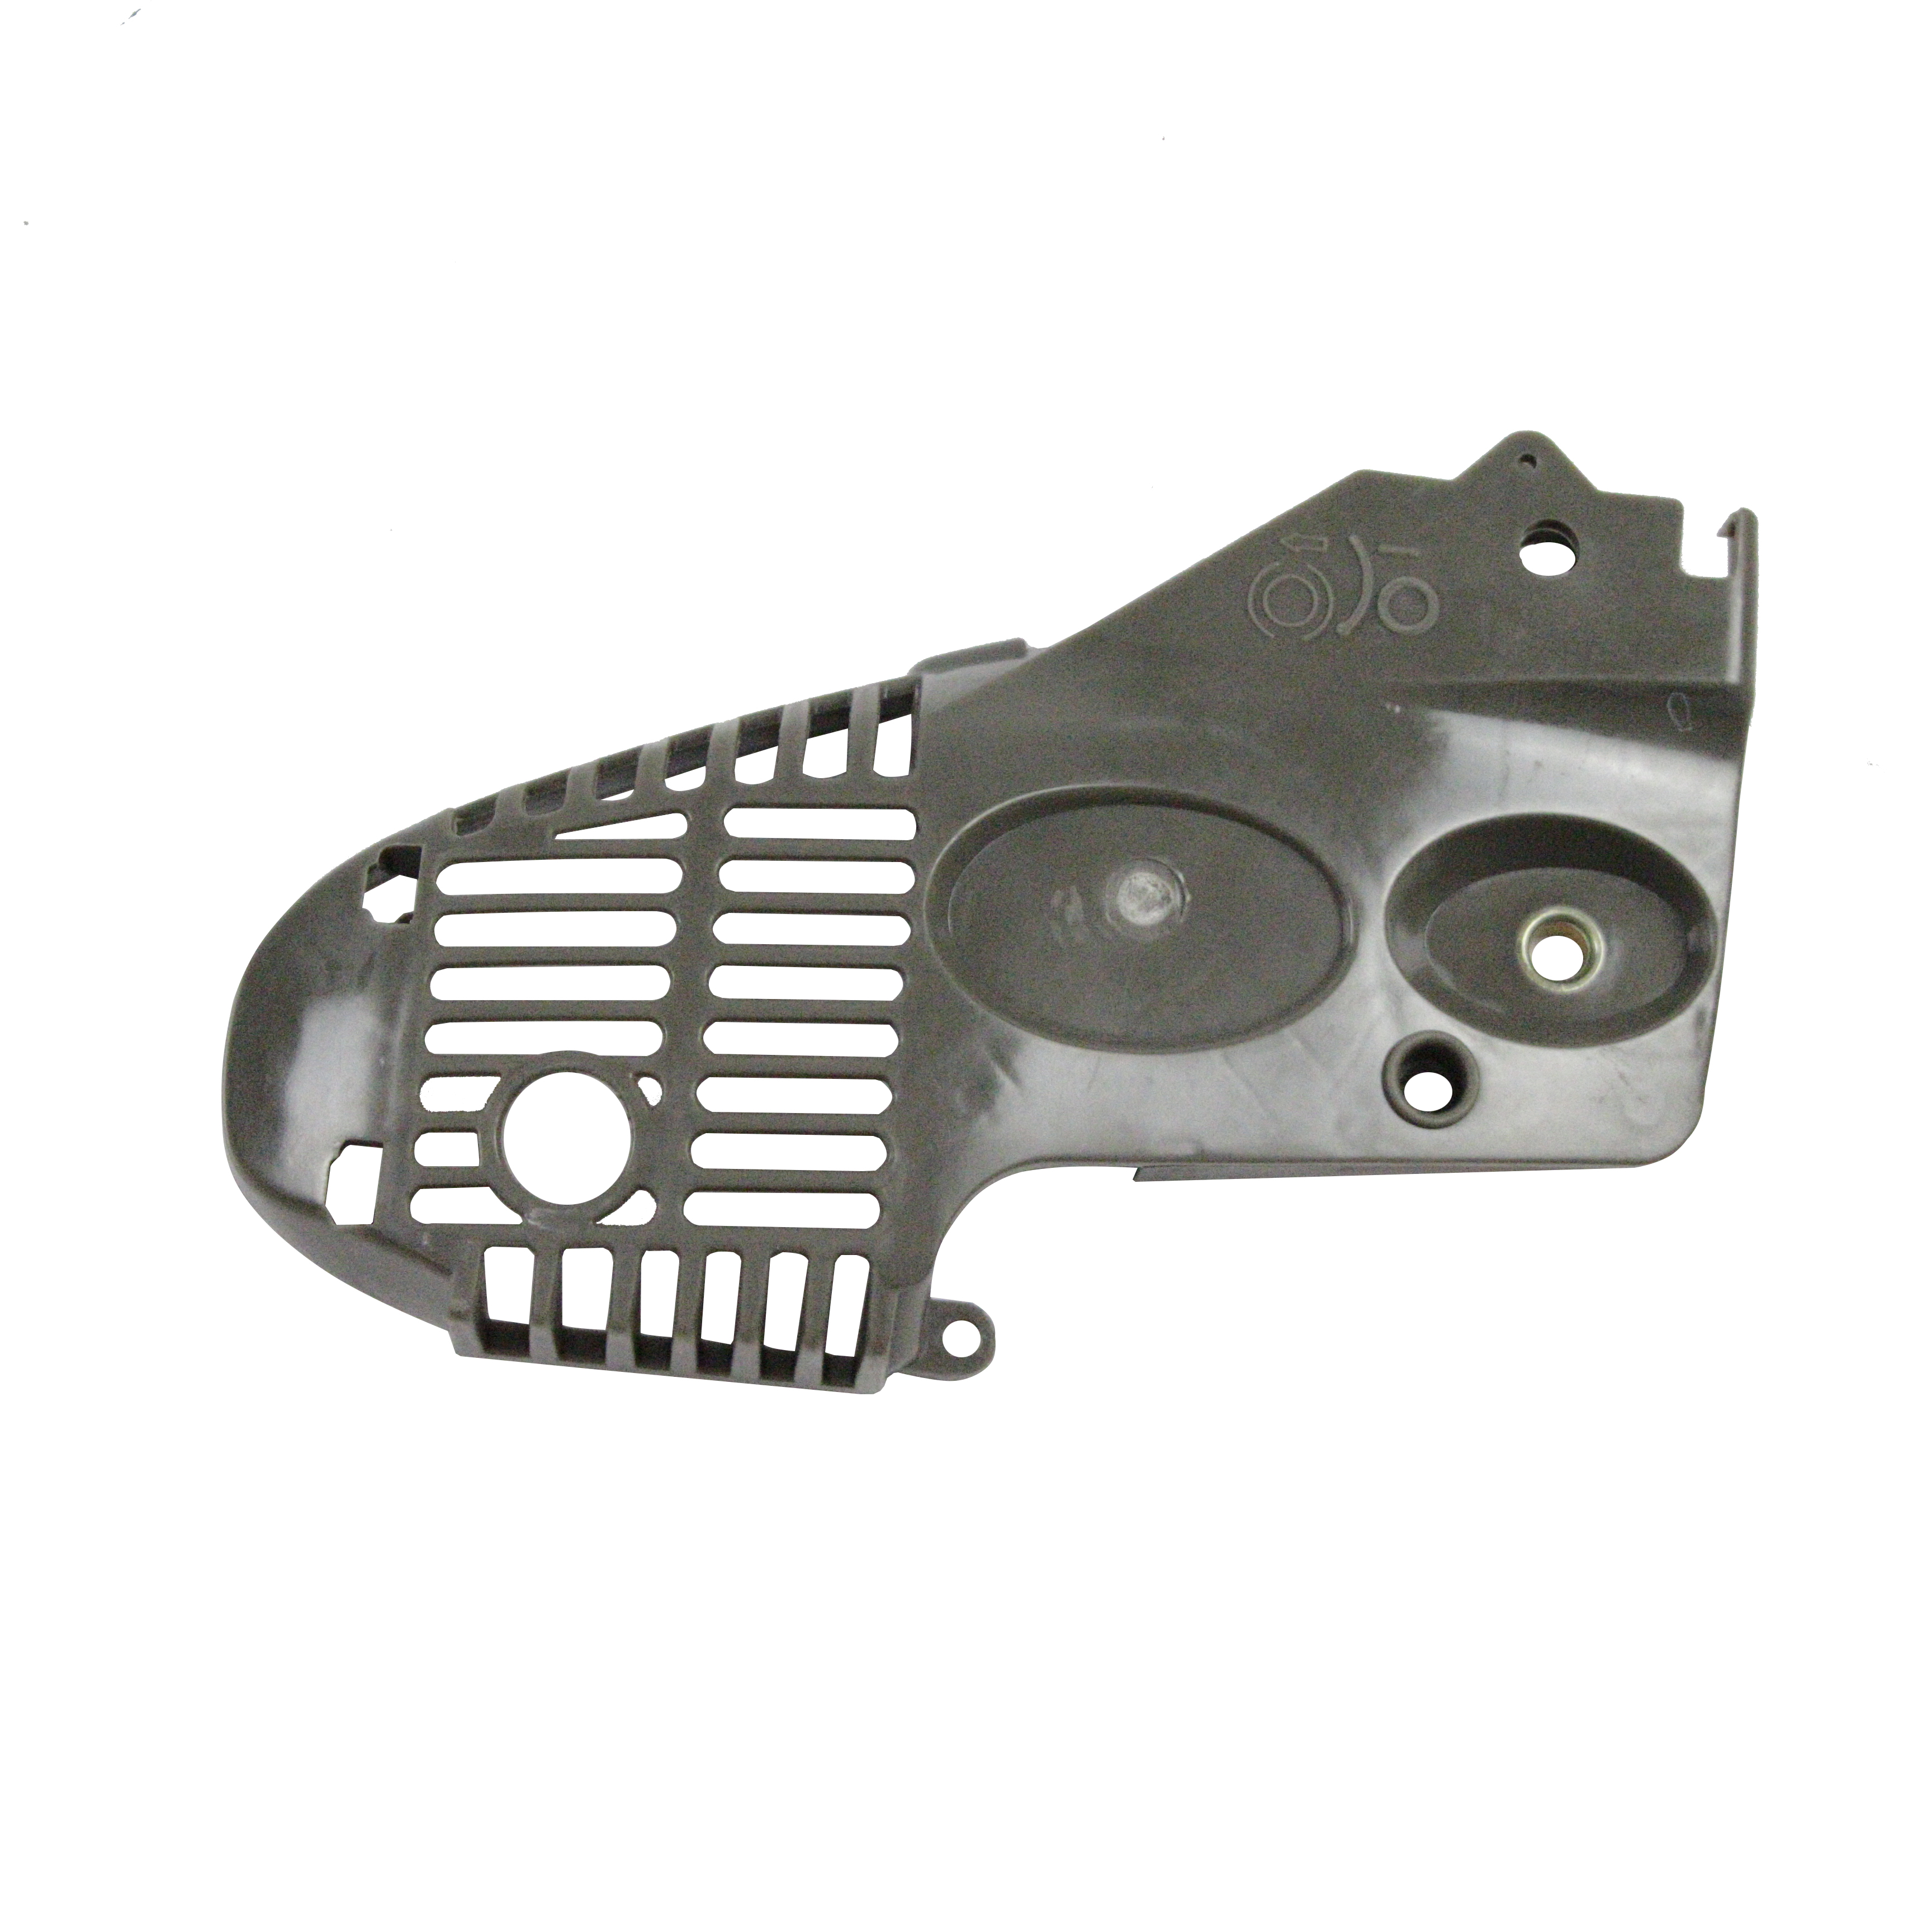 Chain sprocket Cover For Joncutter G2500 Chainsaw